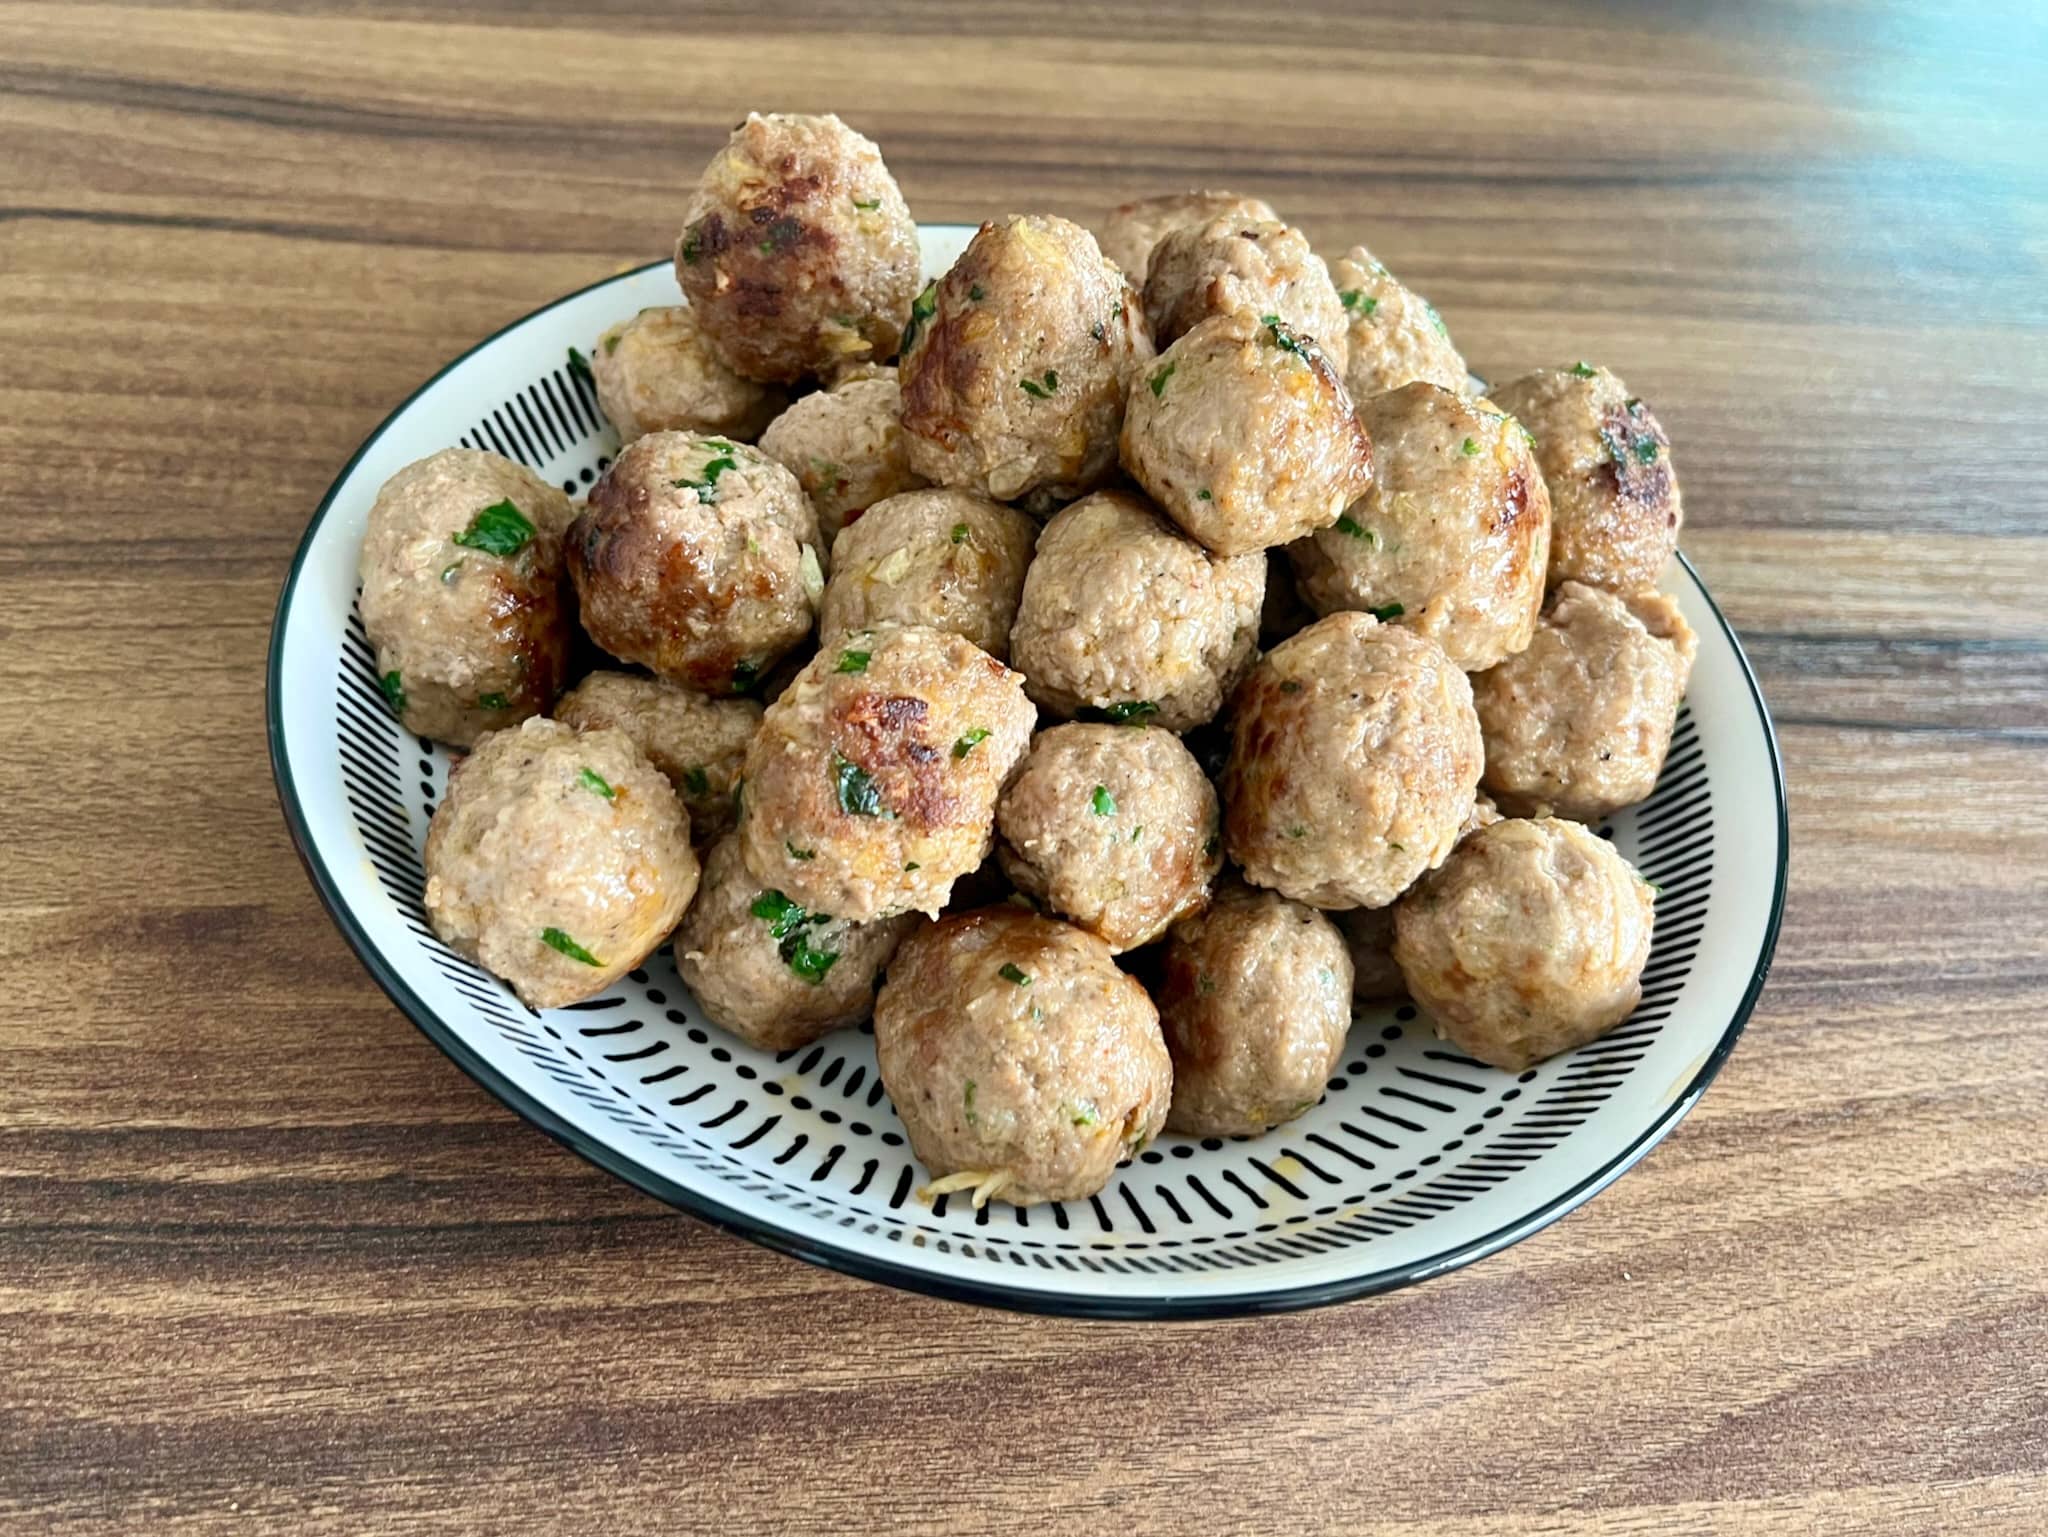 Nicely fryed meatballs on a plate